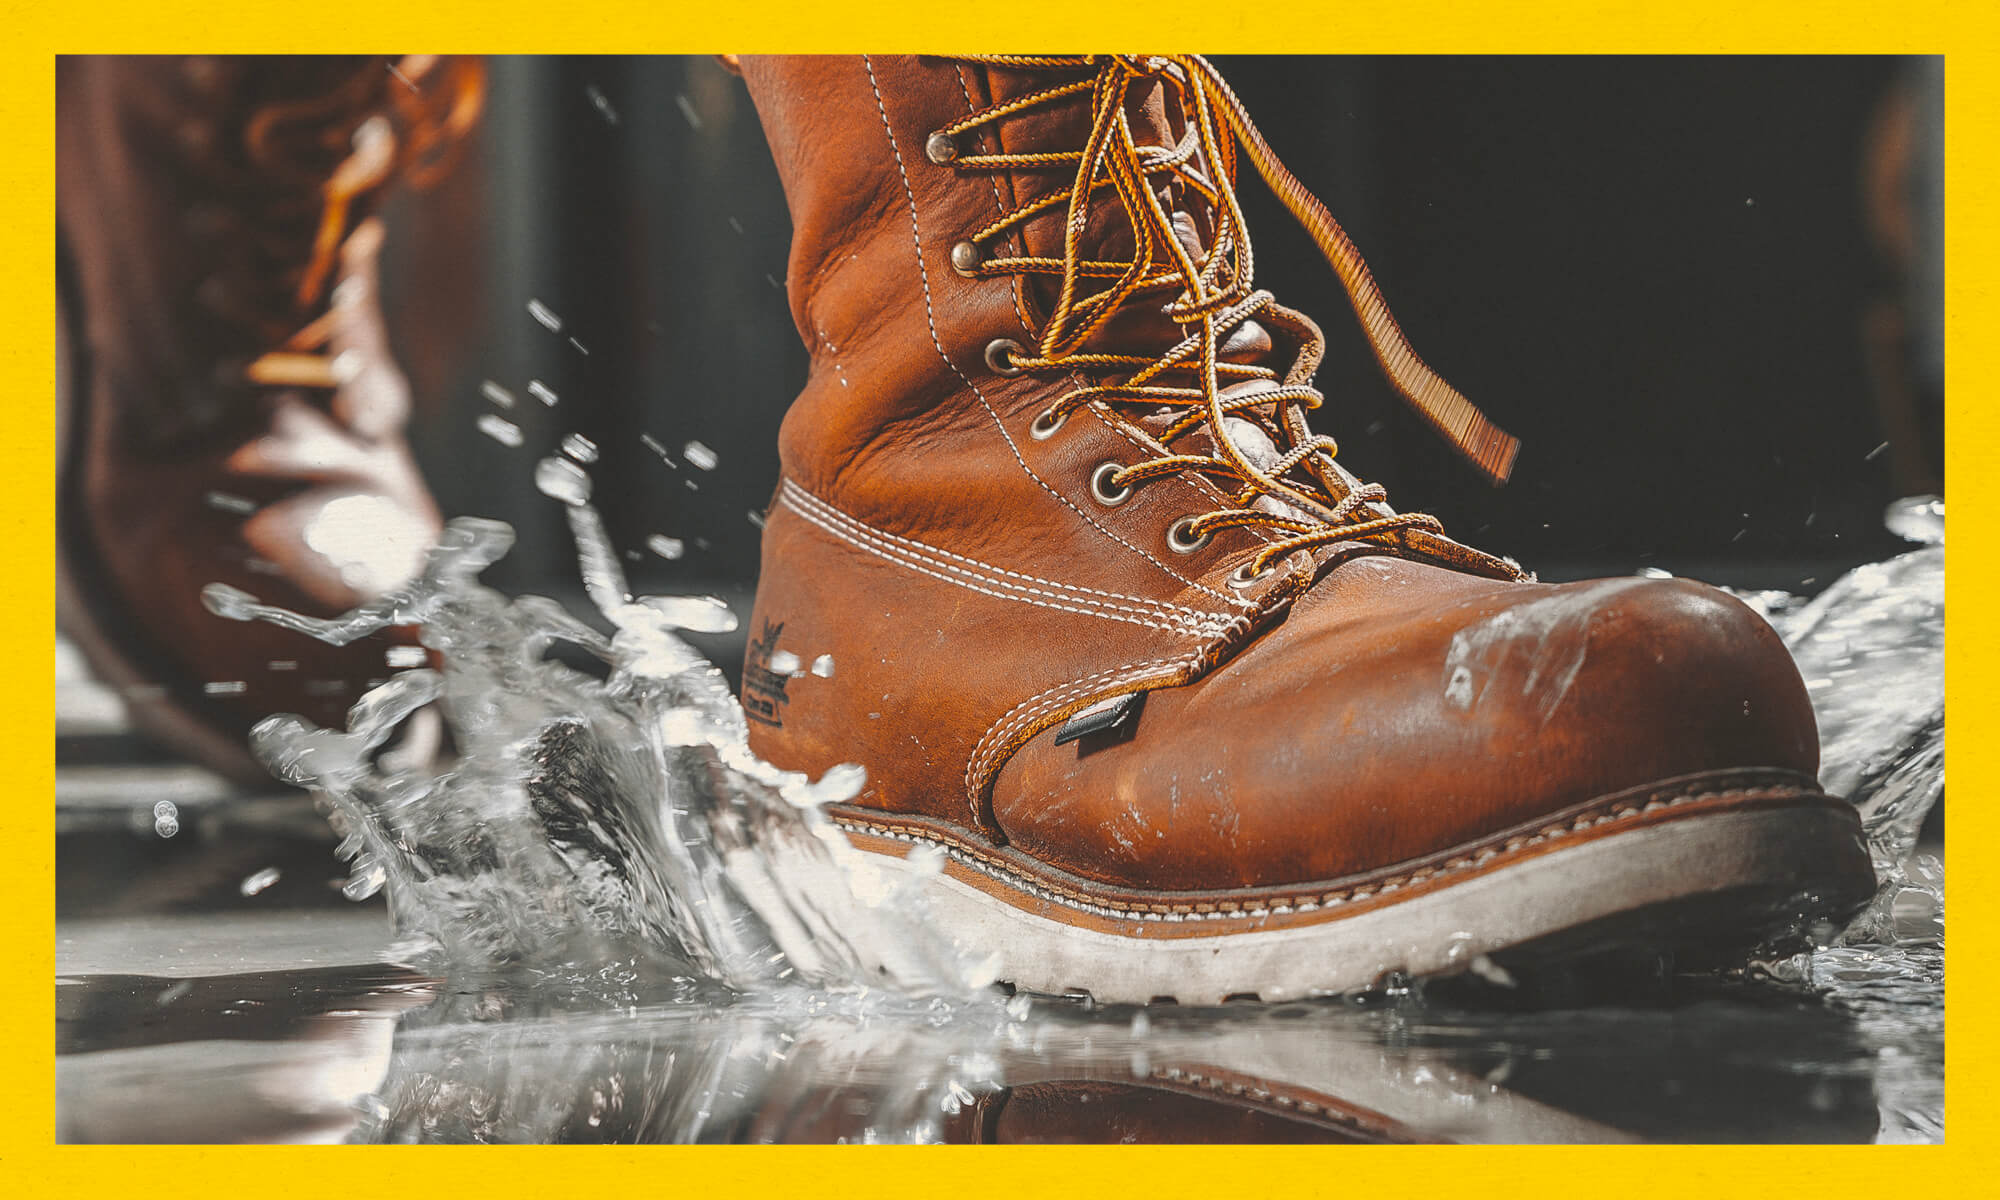 Sno Seal Beeswax Instructions For Waterproofing Boots